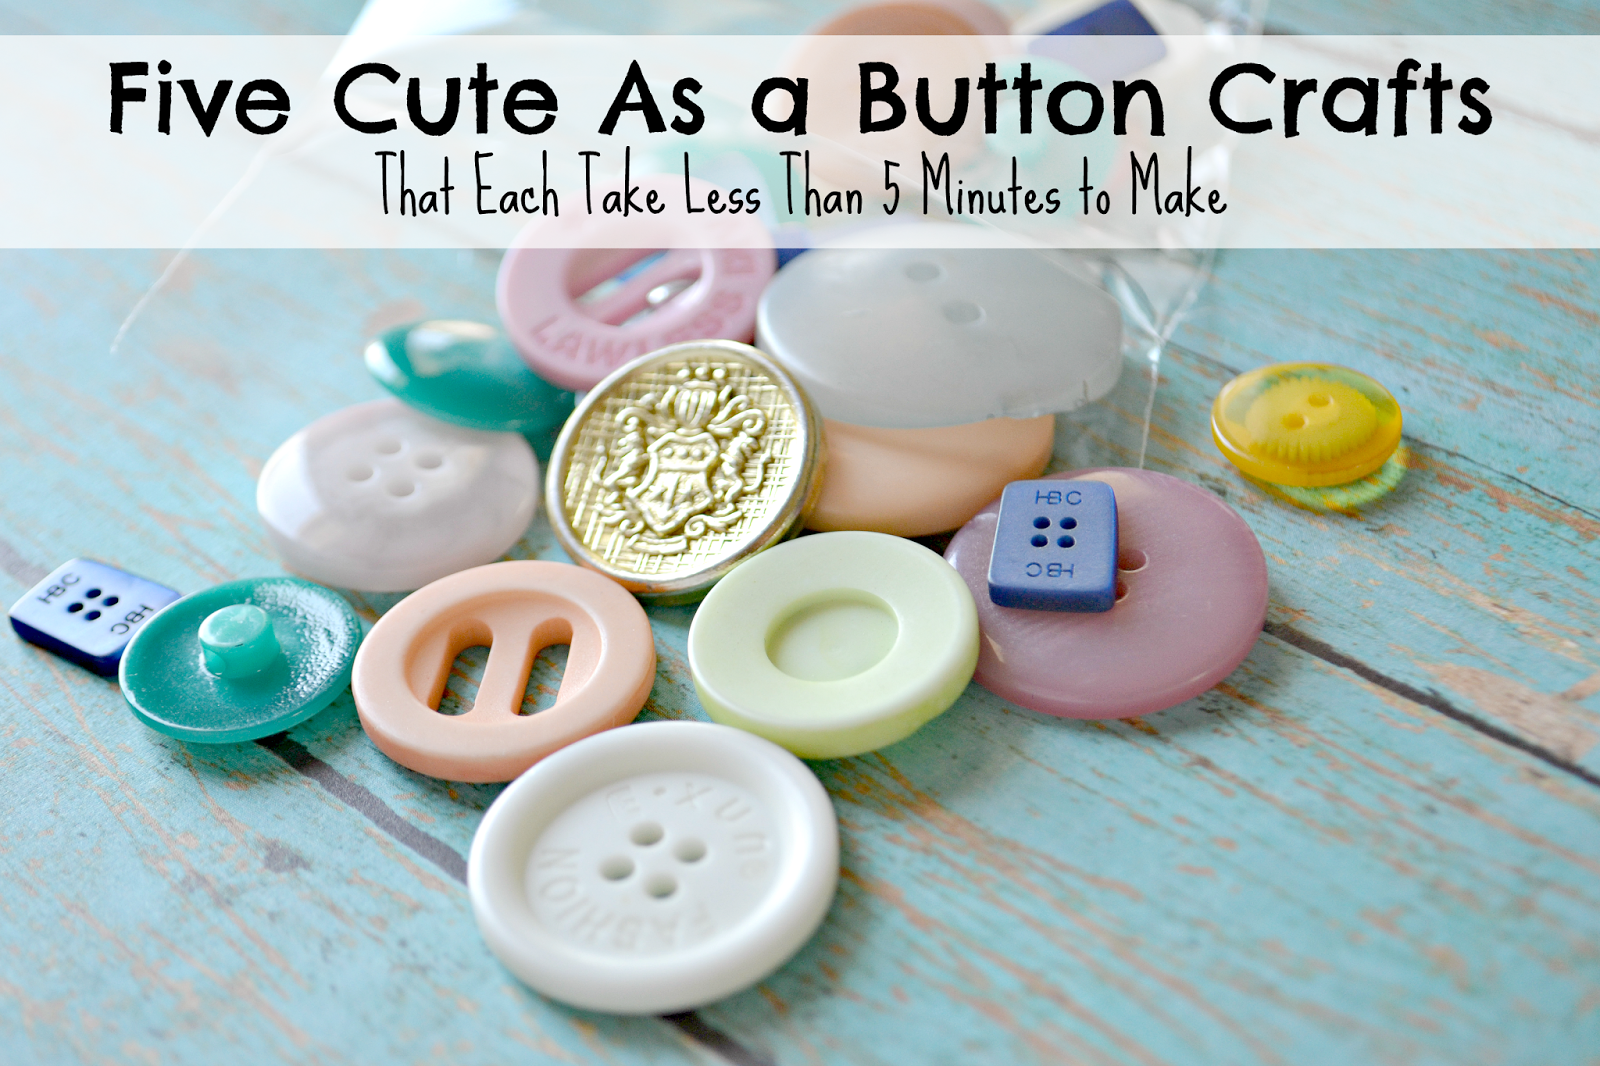 http://www.thelifeofjenniferdawn.com/2014/04/crafting-with-buttons.html